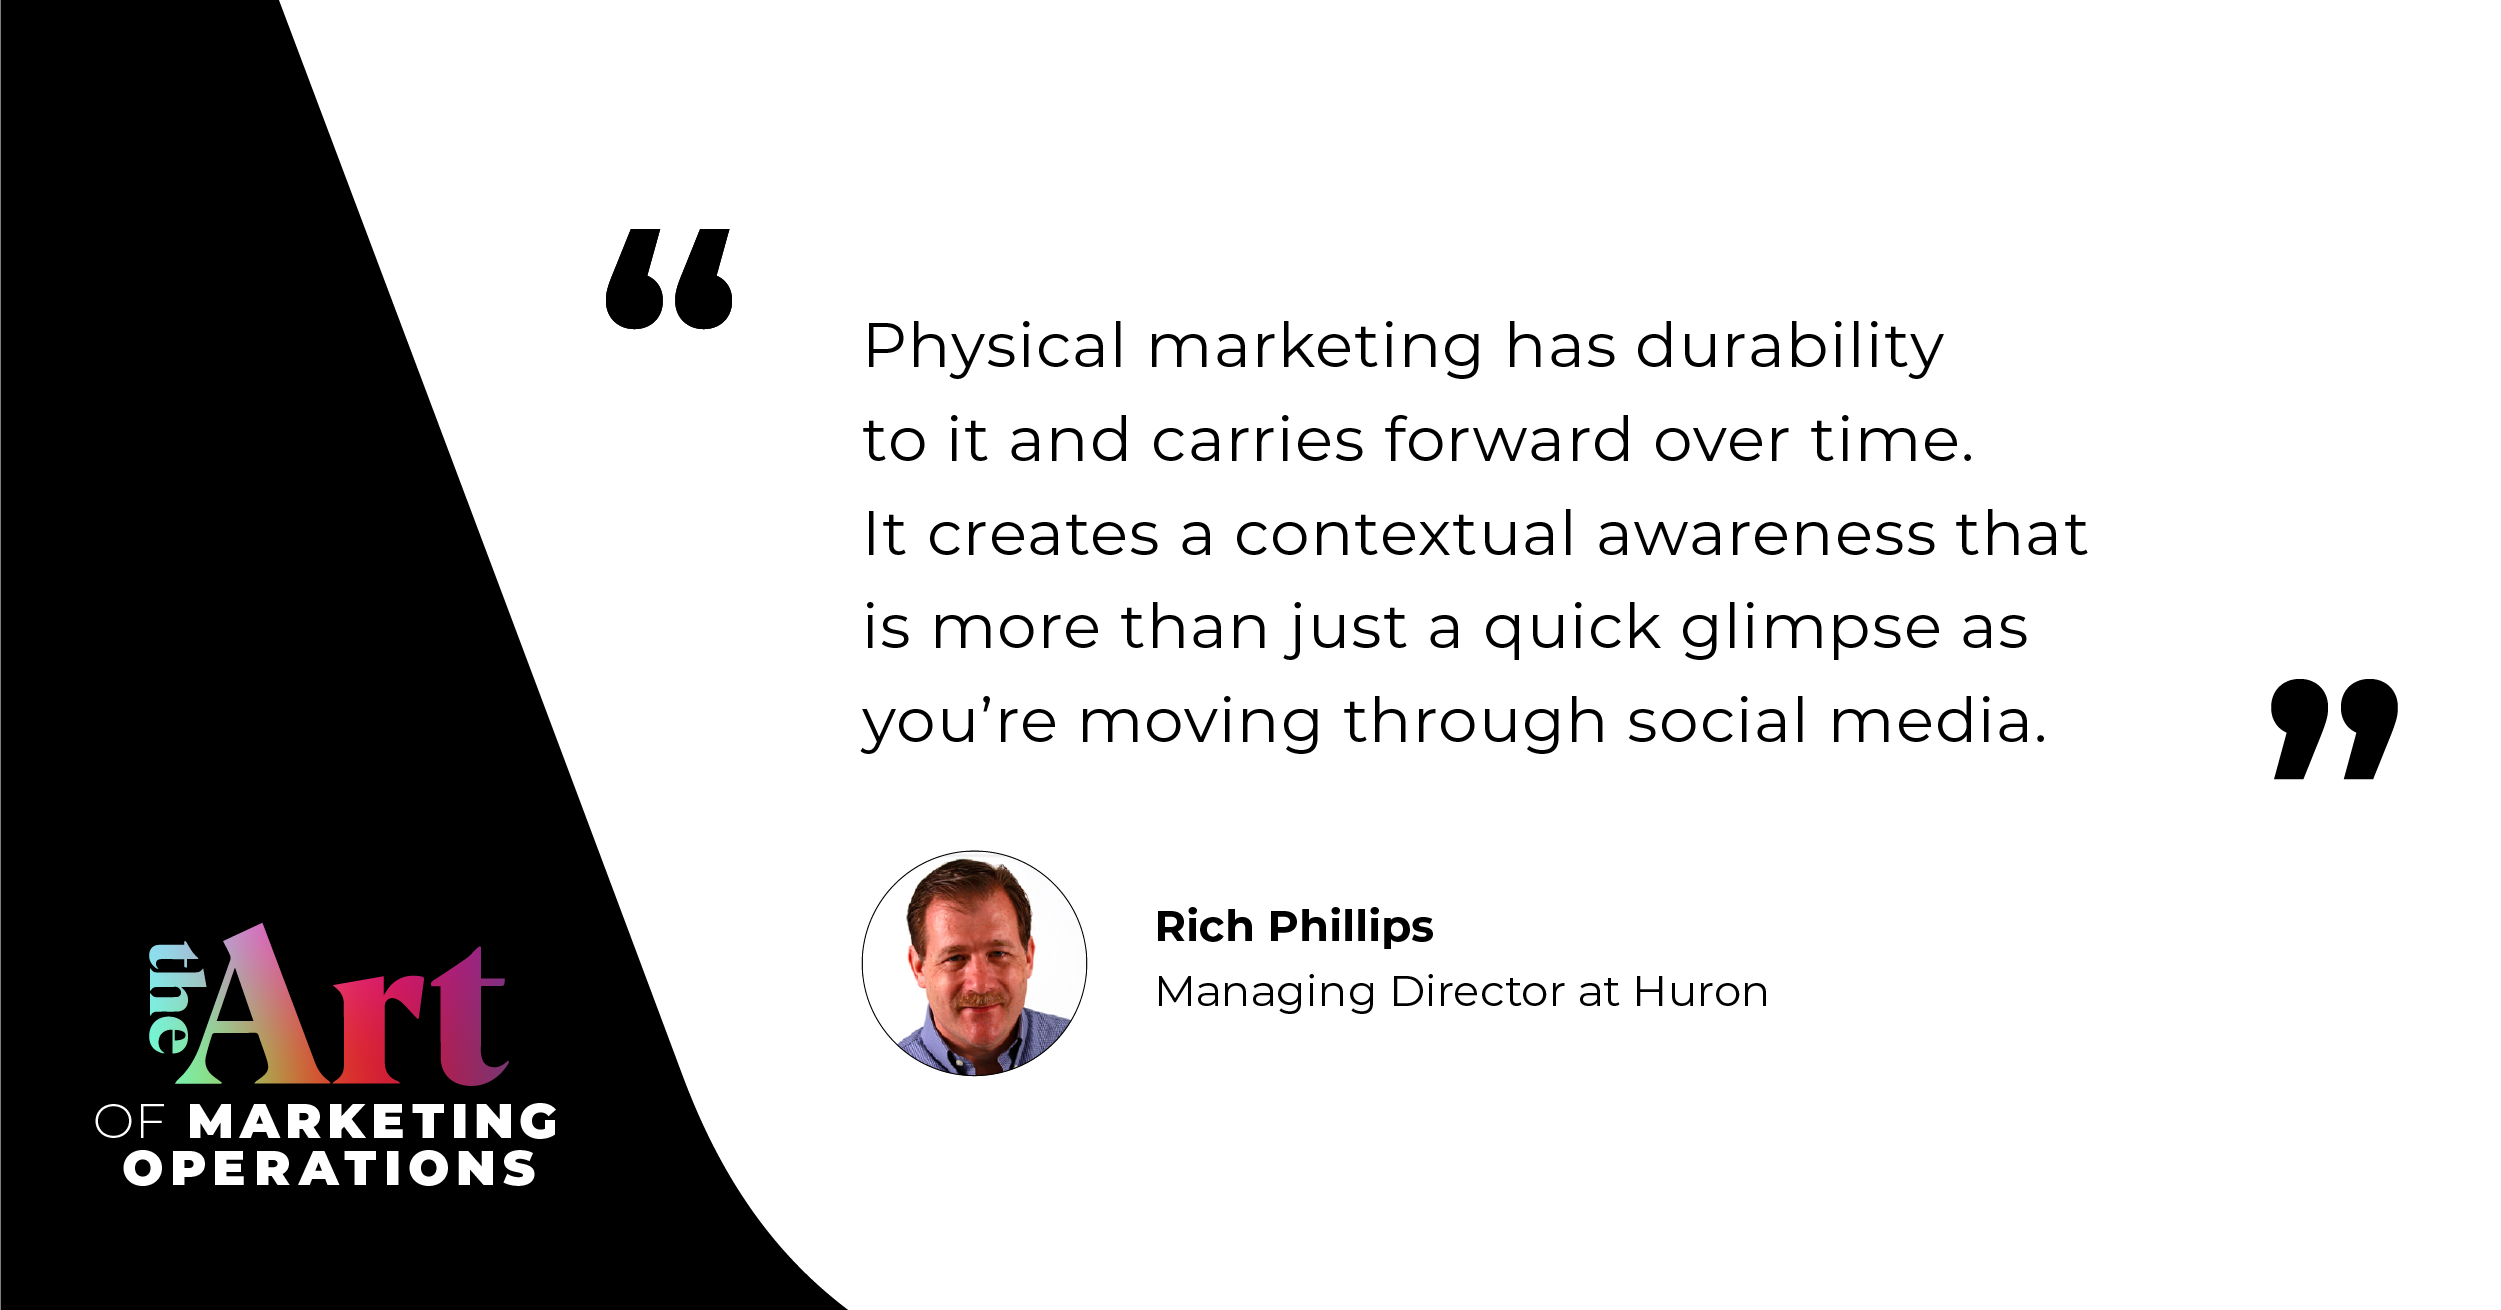 Physical marketing has a durability to it and carrier forward over time. It creates a contextual awareness that is more than just a quick glimpse as you're moving through social media. - Rich Phillips